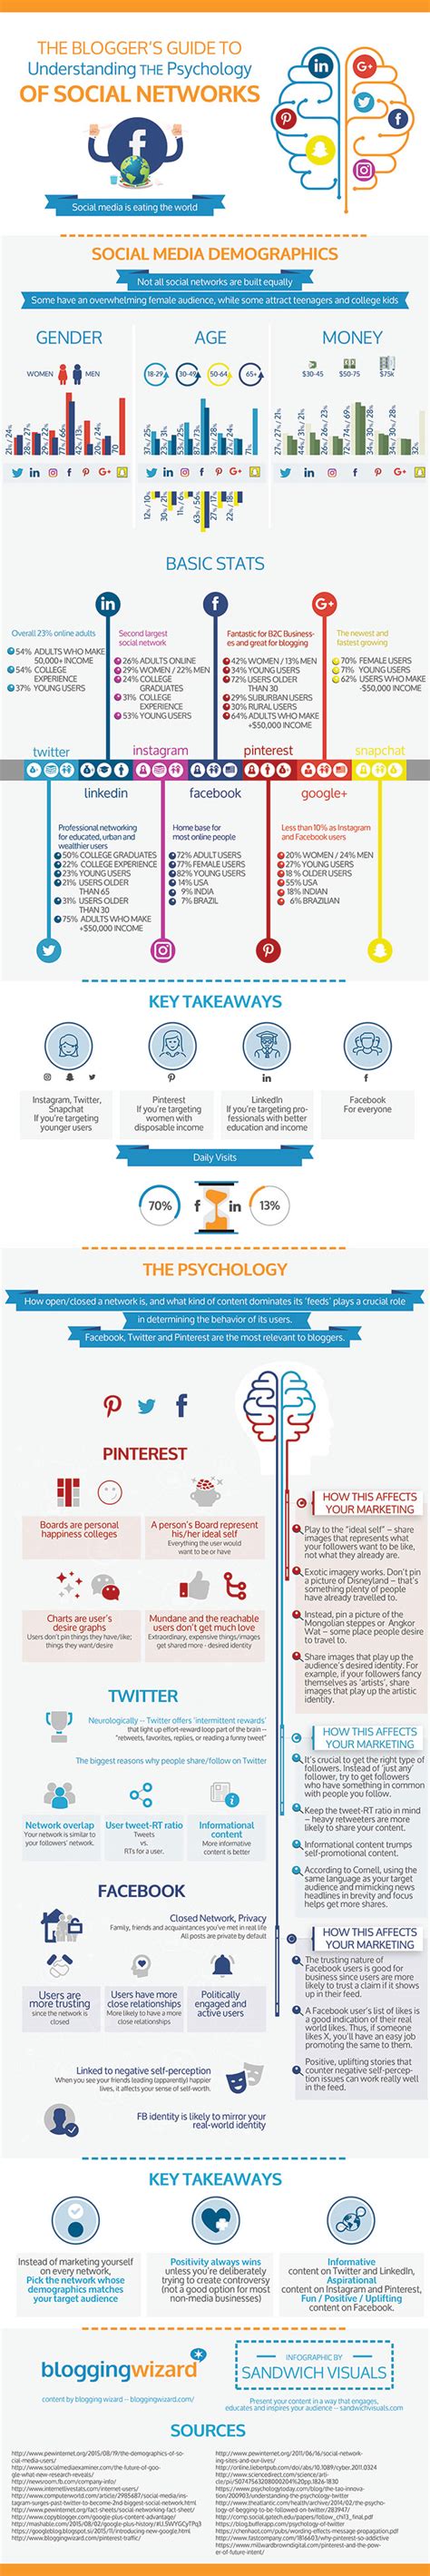 How The Psychology Of Social Networks Can Improve Your Marketing